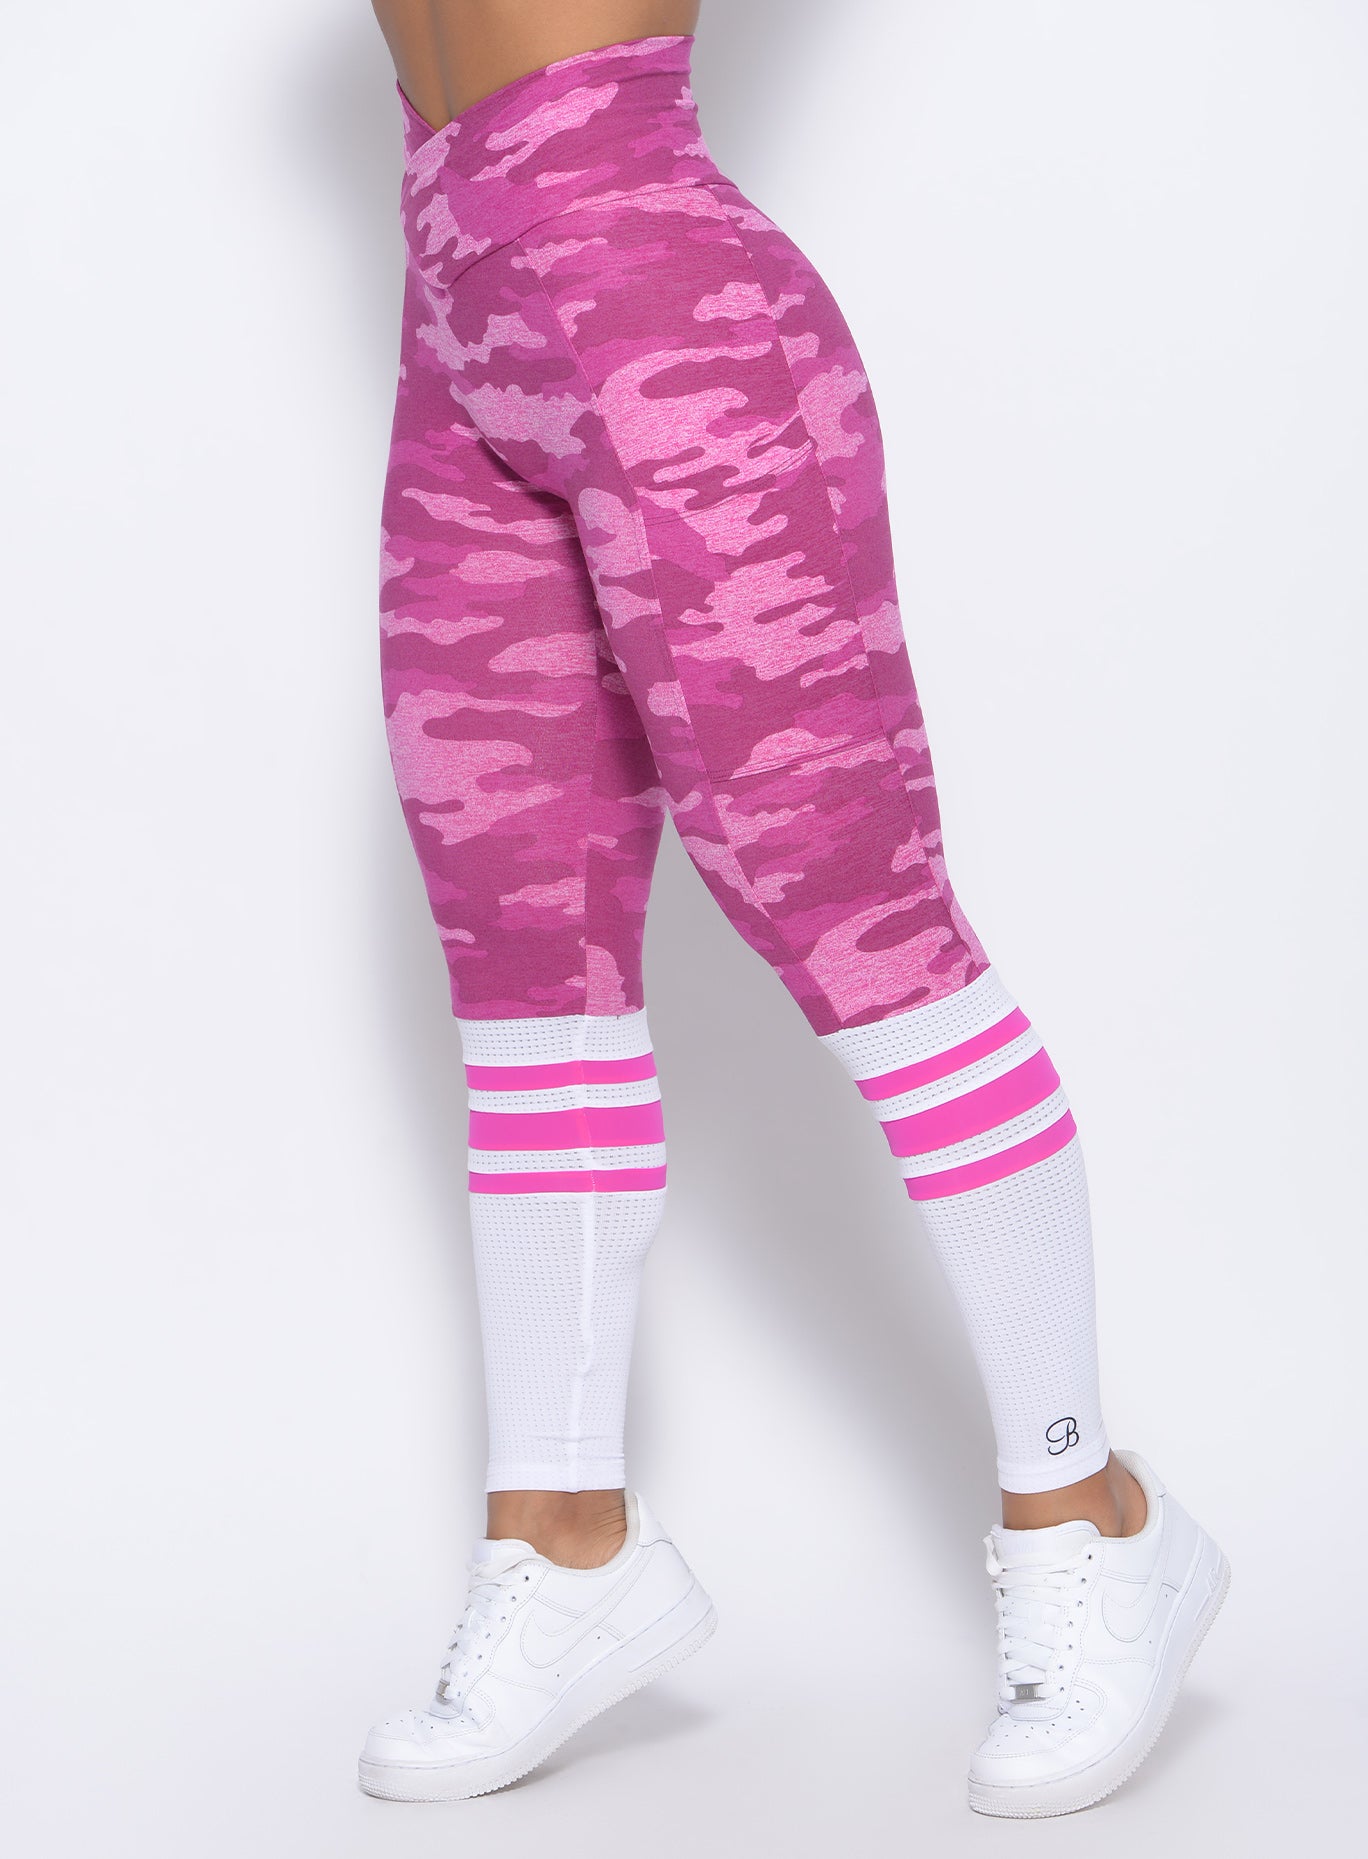 Zoomed in left side view of our pink camo contour sock leggings 